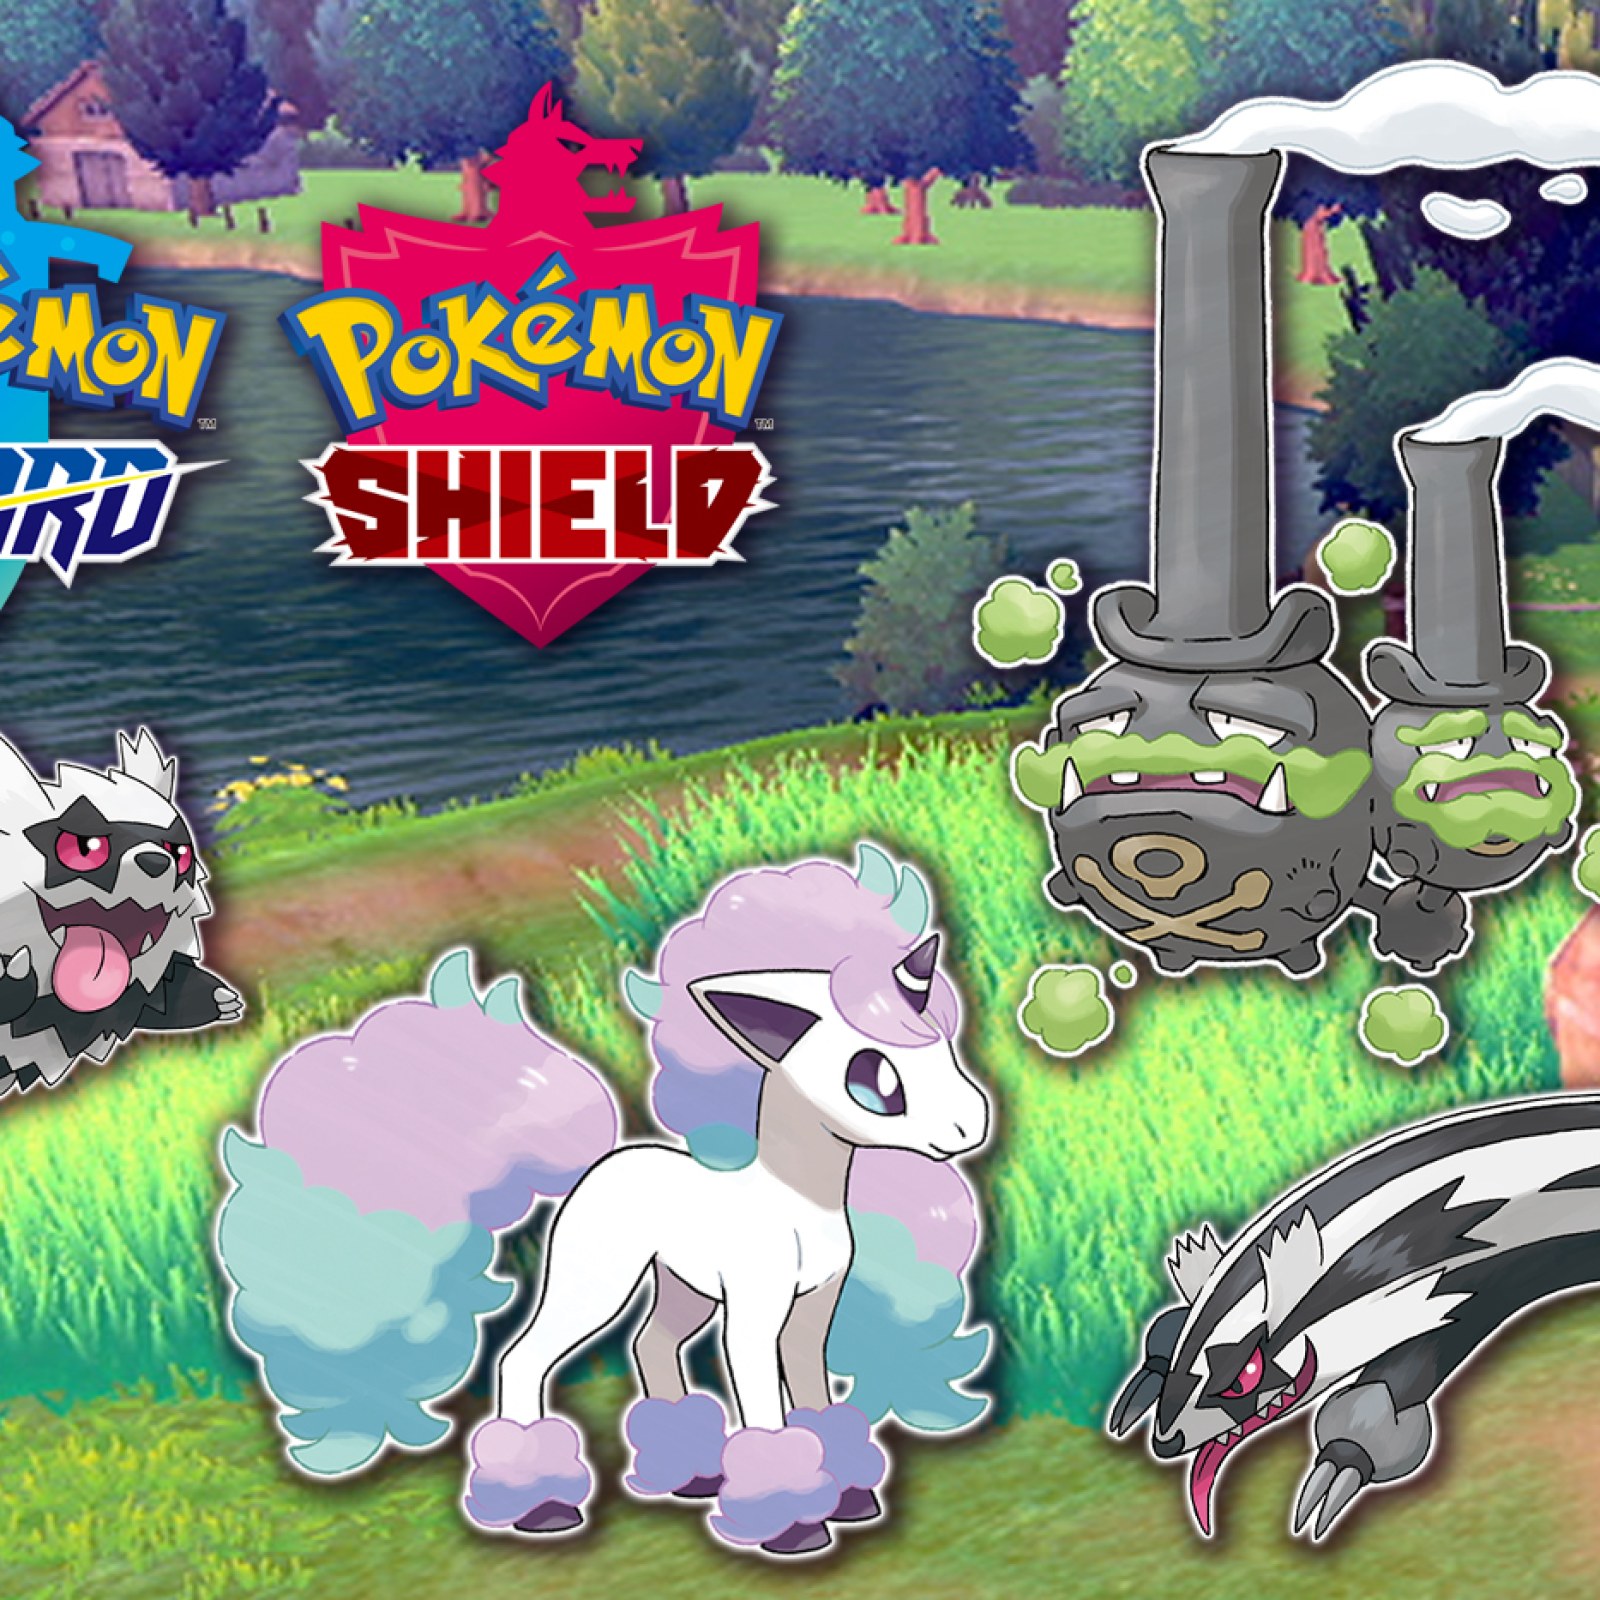 Pokémon Sword and Shield's new monsters are made of coal and cream